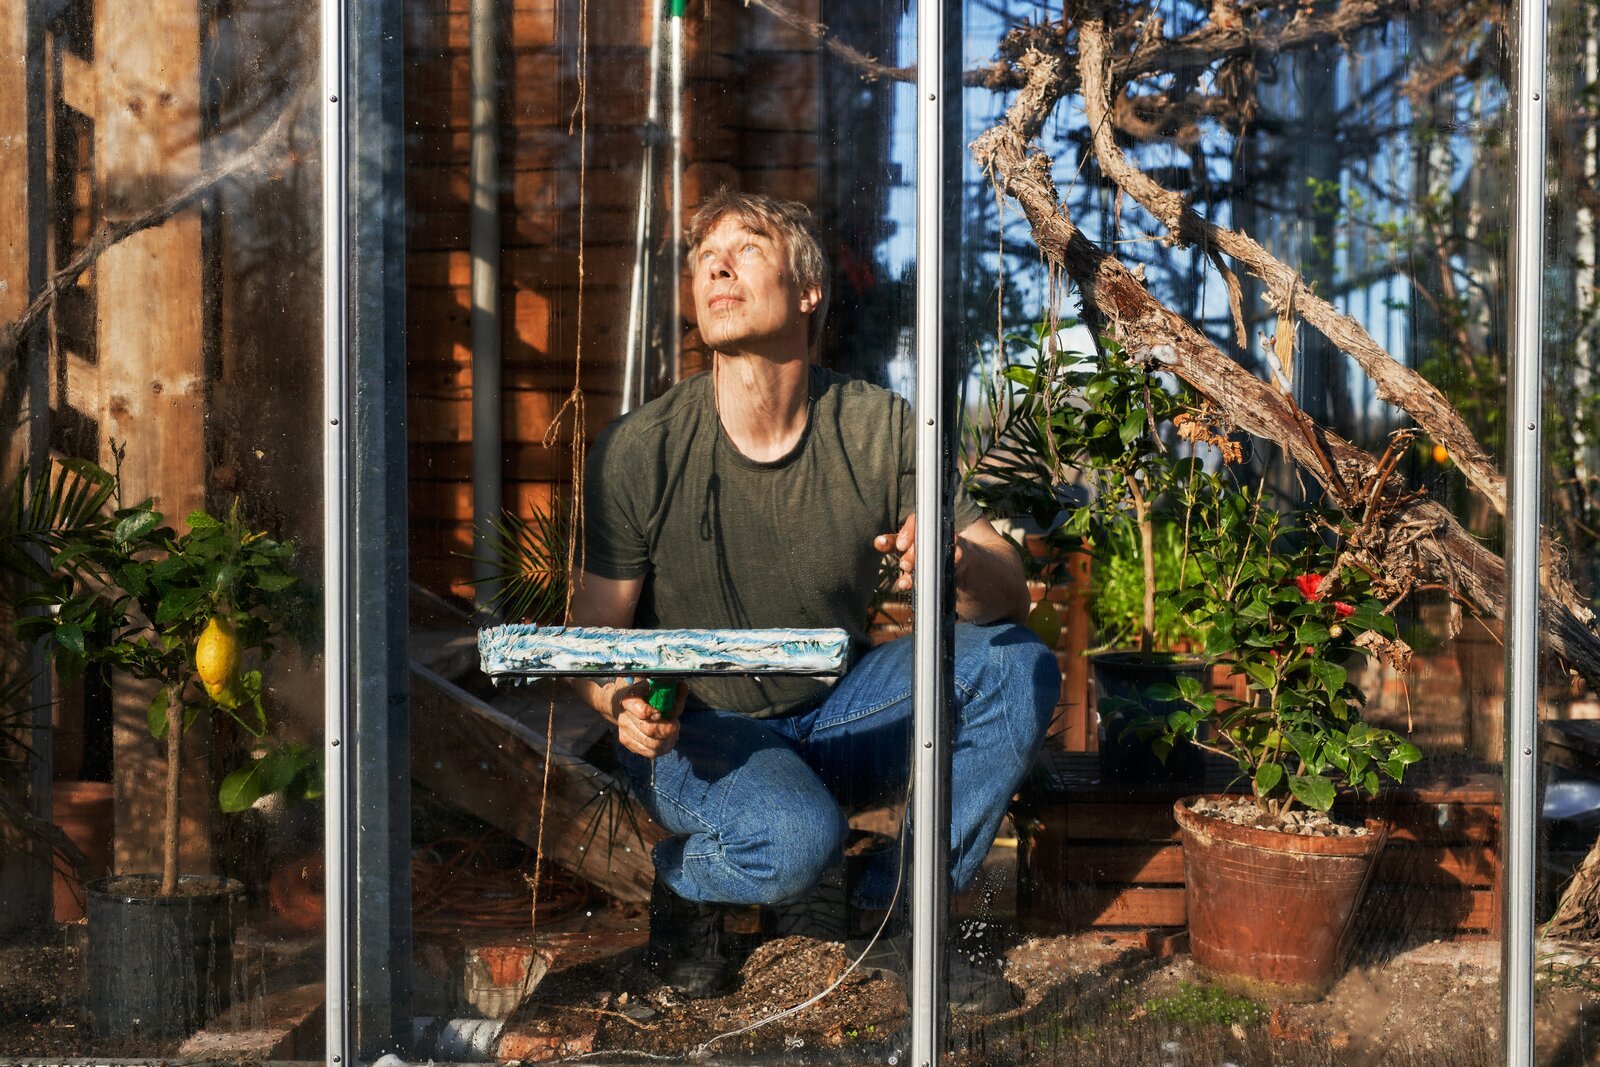 How Sweden Became the Surprising Center of the Greenhouse Home Movement